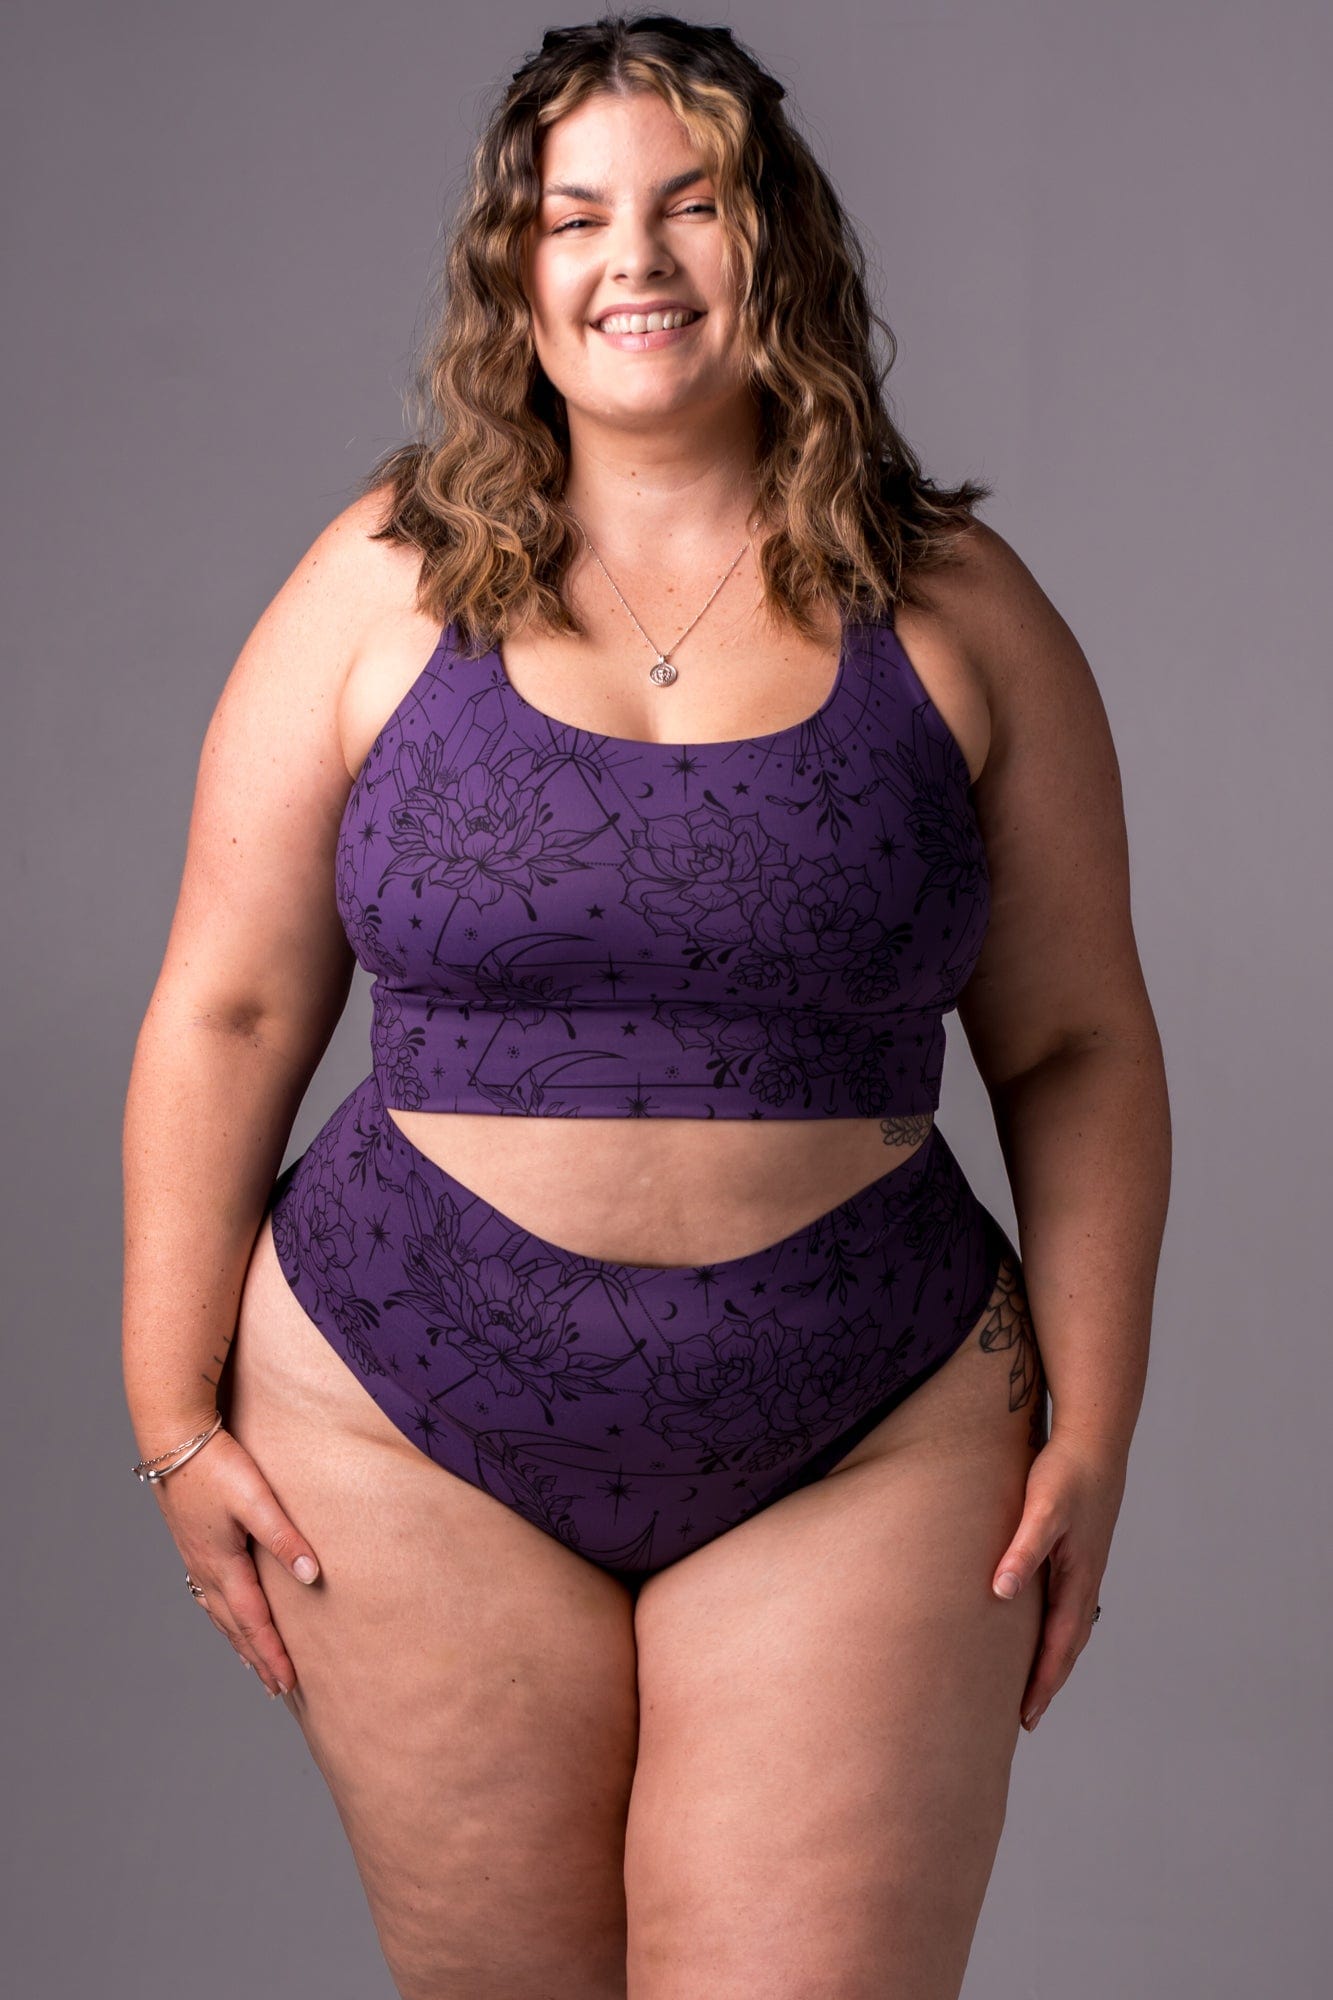 Amethyst High Waisted Underwear: Flatter Your Figure and Feel